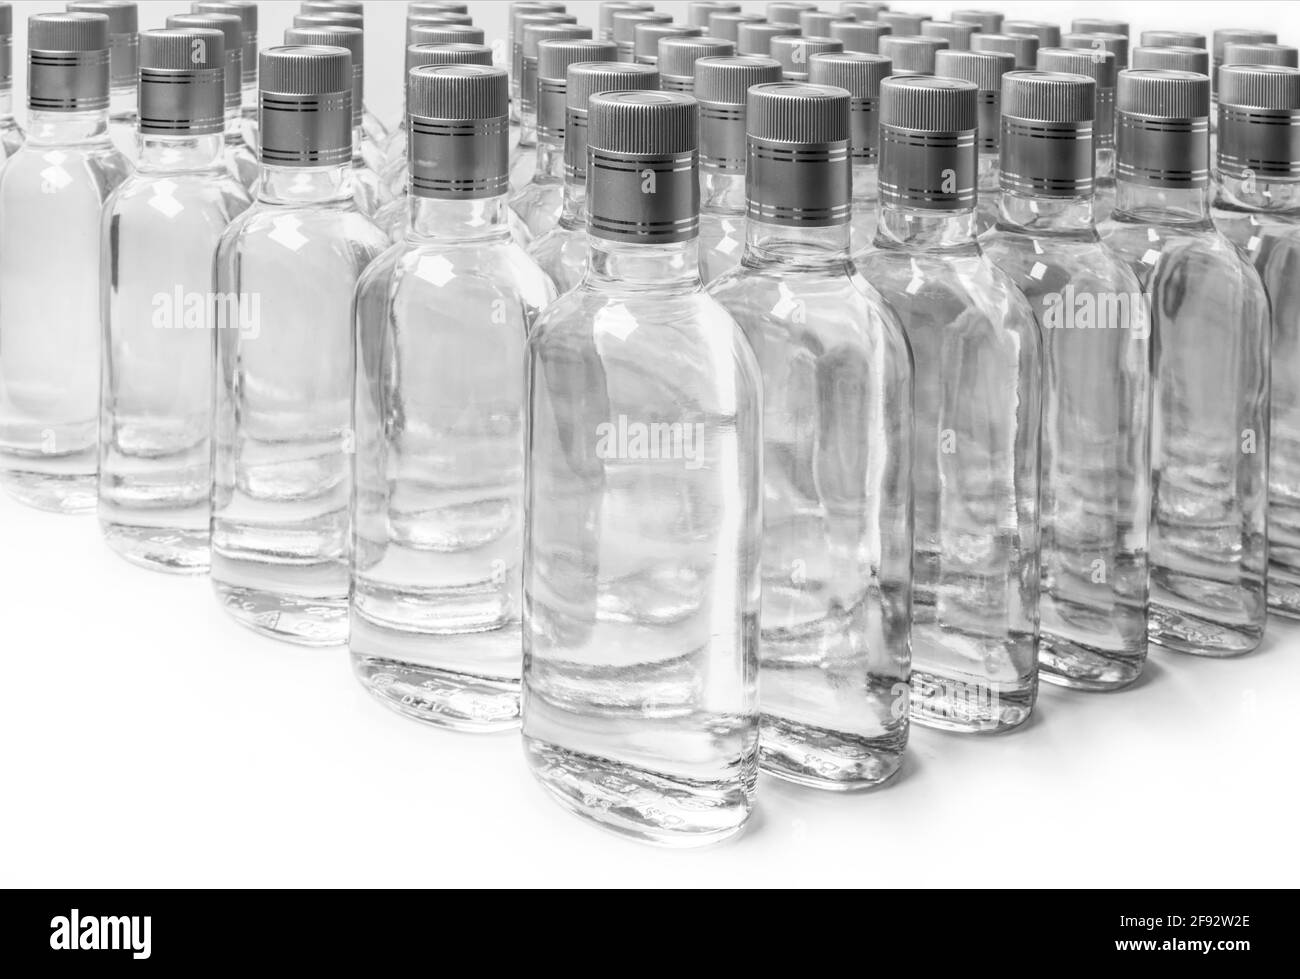 Bottles of pure alcohol not labeled. Multitude Bottles of Home Alcoholic Beverages Isolated On White. Small liquor production based on distillation. B Stock Photo